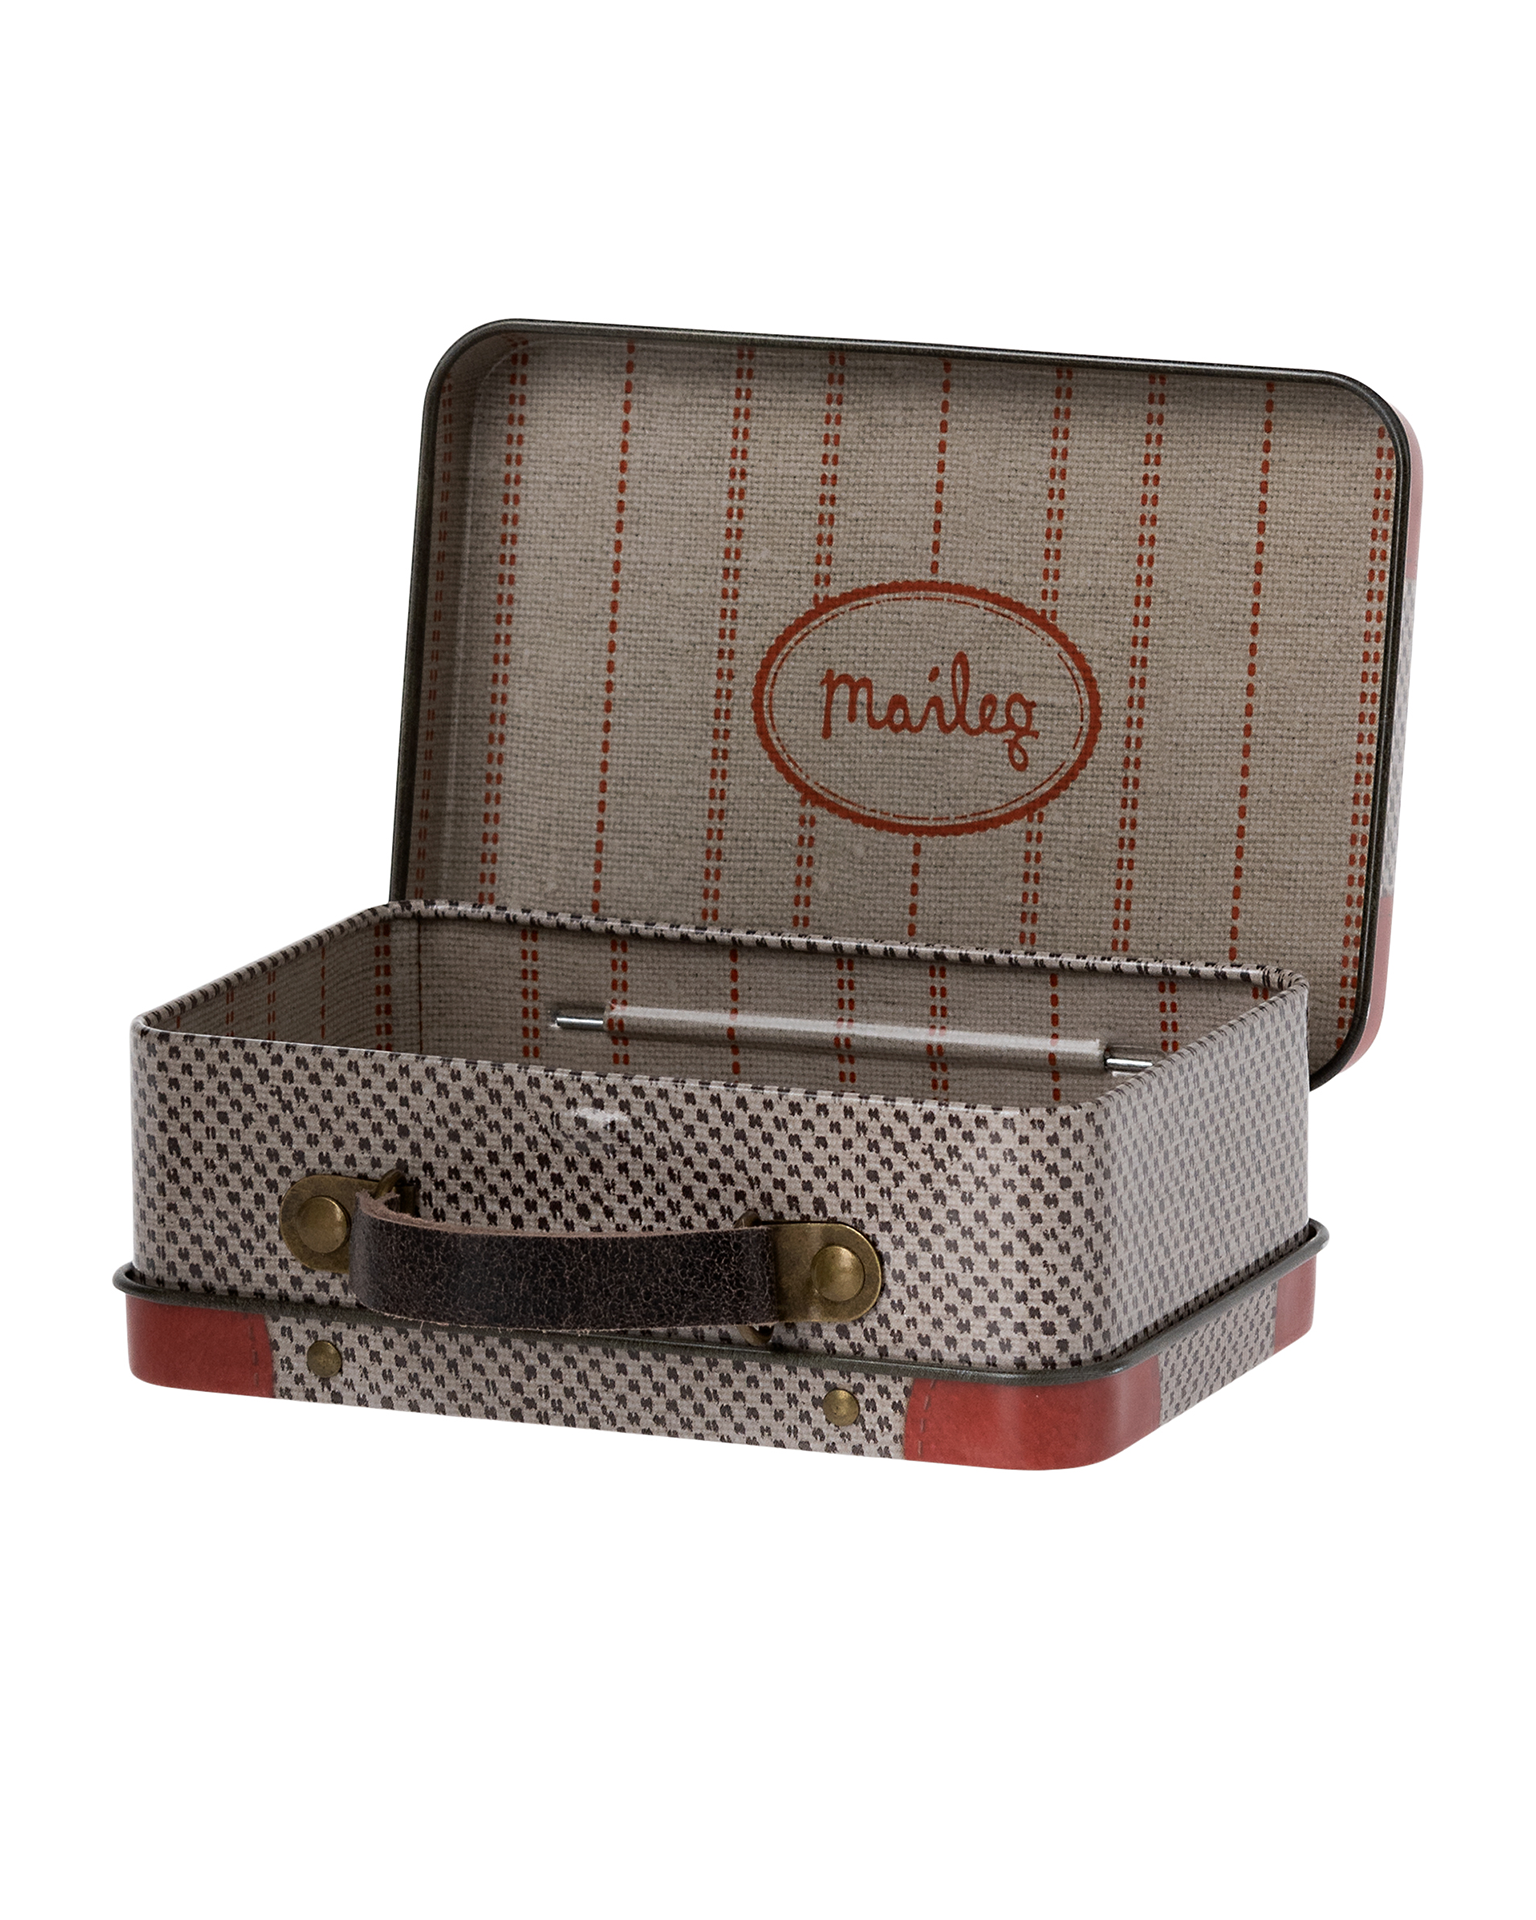 Little maileg play travel suitcase in grey